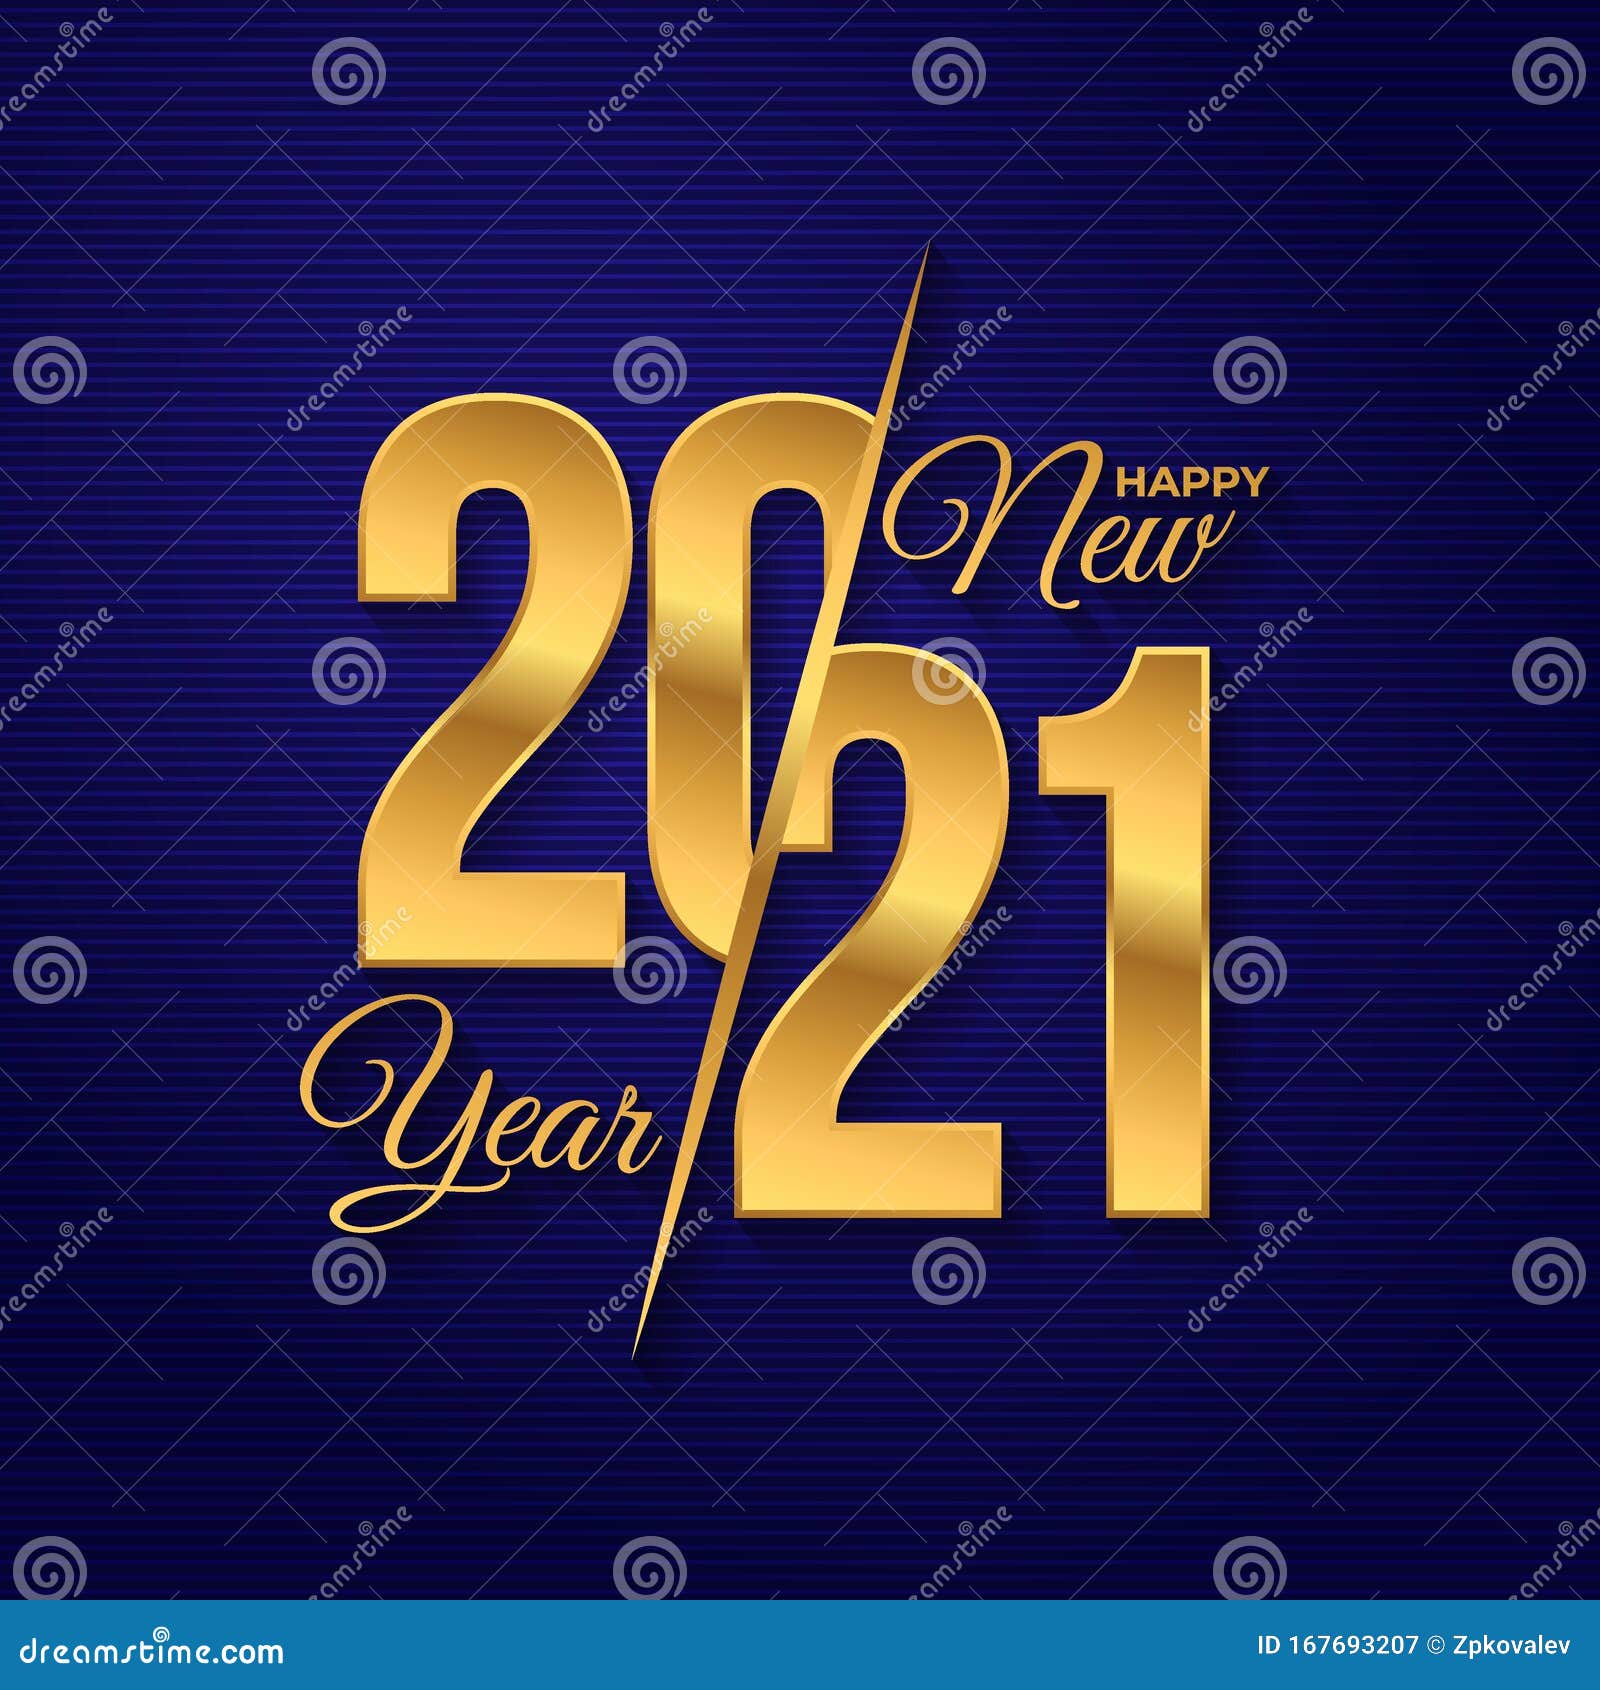 2021 Logo Happy New Year. Celebration Text Graphics. Cover ...